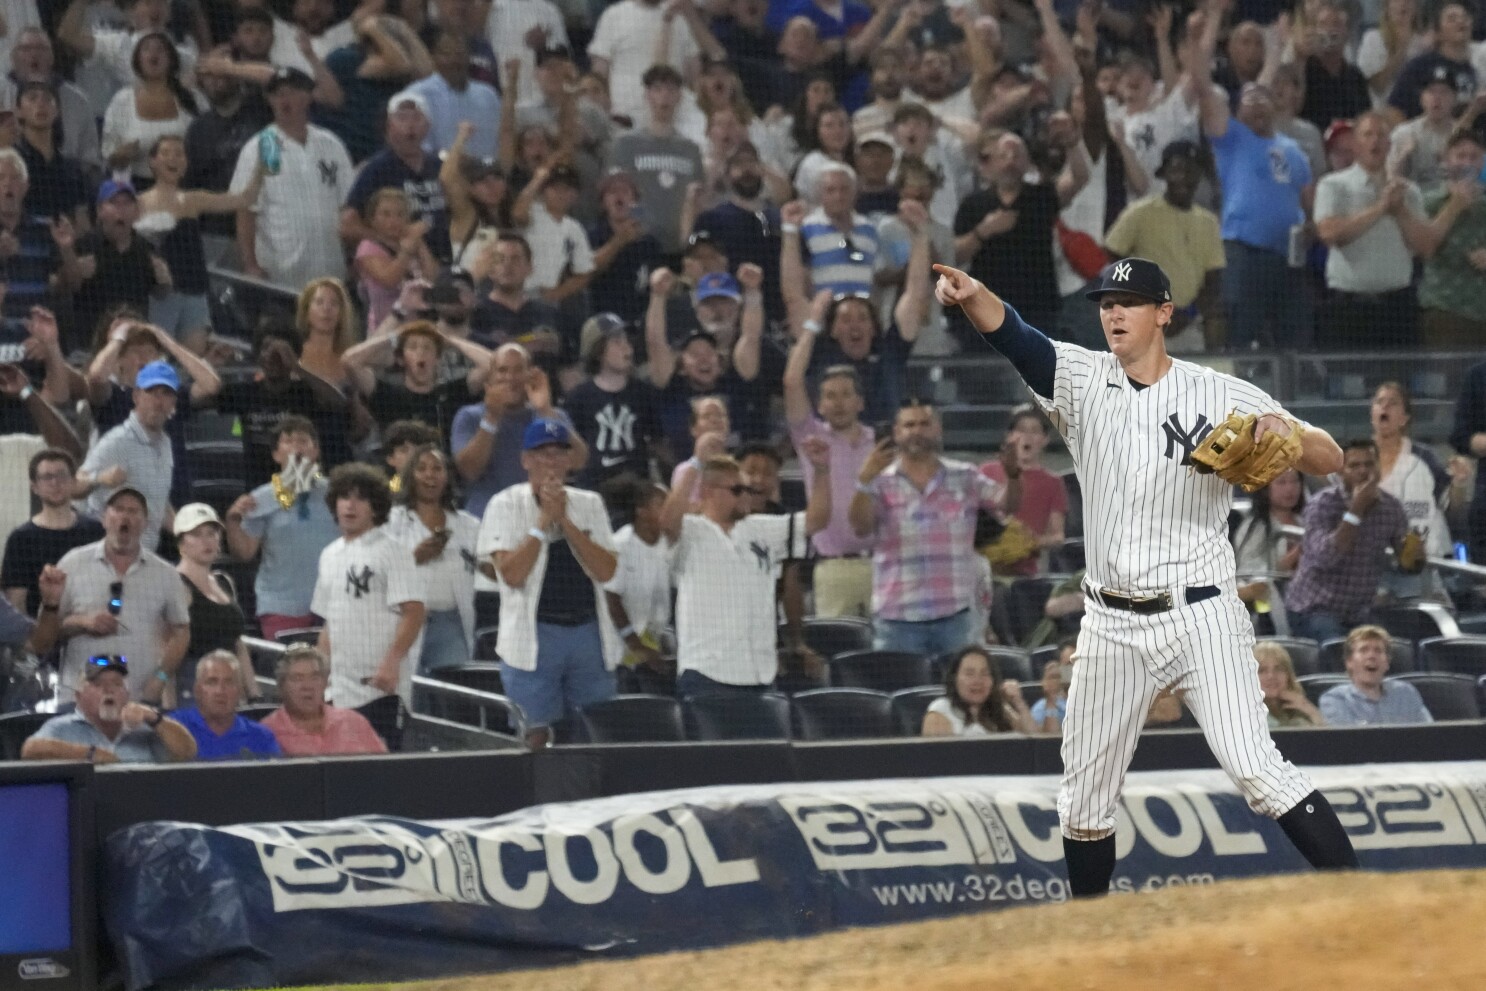 GIF: Yankee fan freaks out after not catching home run ball